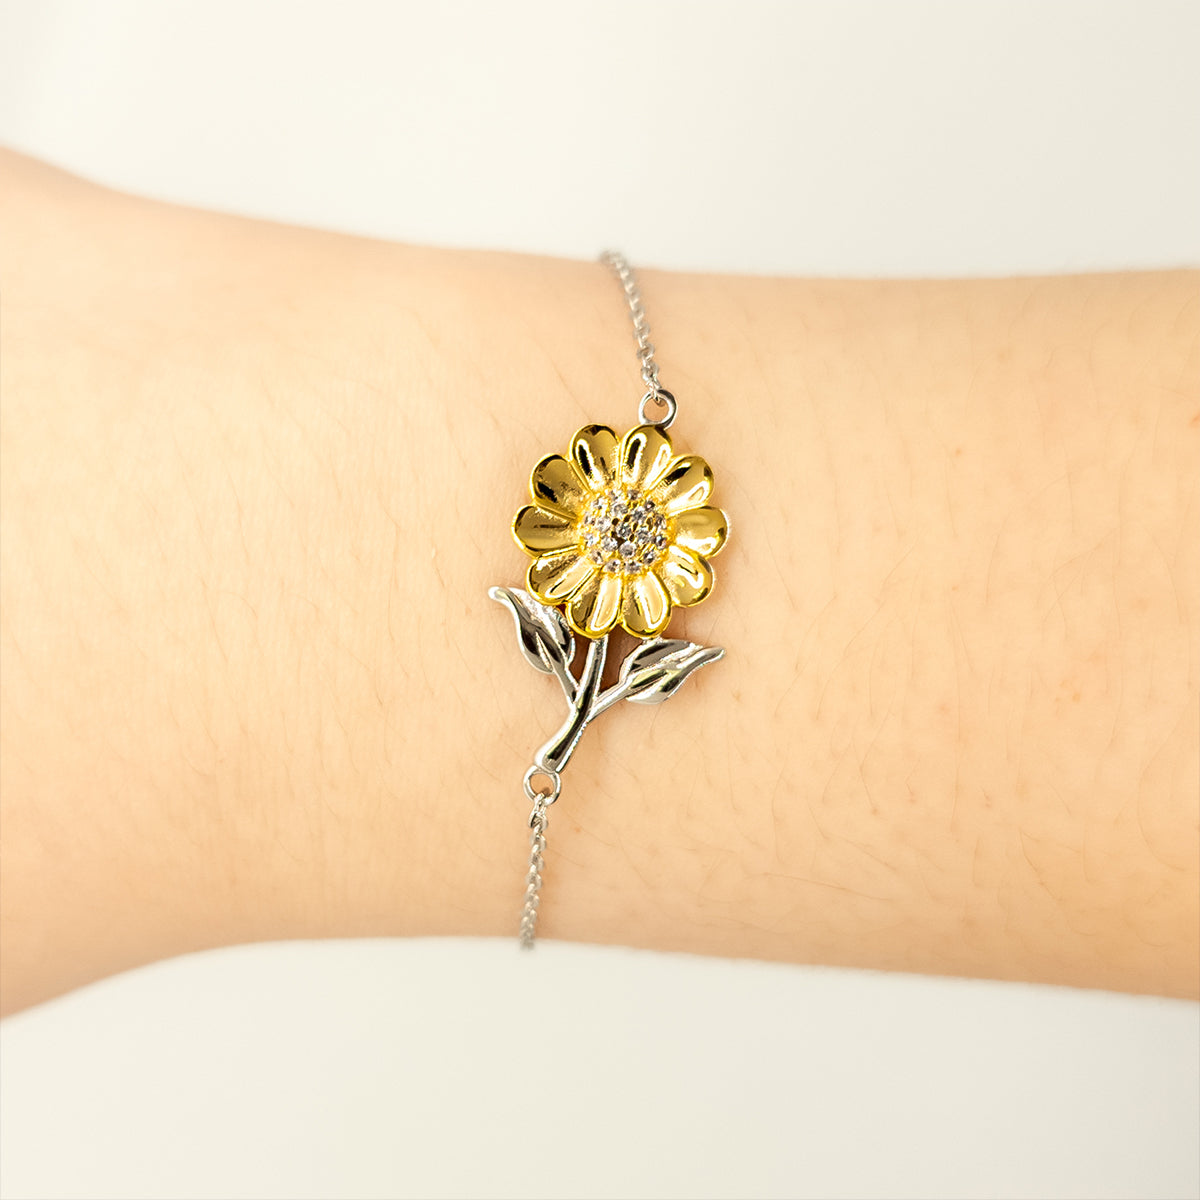 Engraved Sunflower Bracelet for Dad - Youll always have a special place in my heart. Perfect for Fathers Day, Birthday, Christmas. Unique gift for Dad to show love and appreciation.